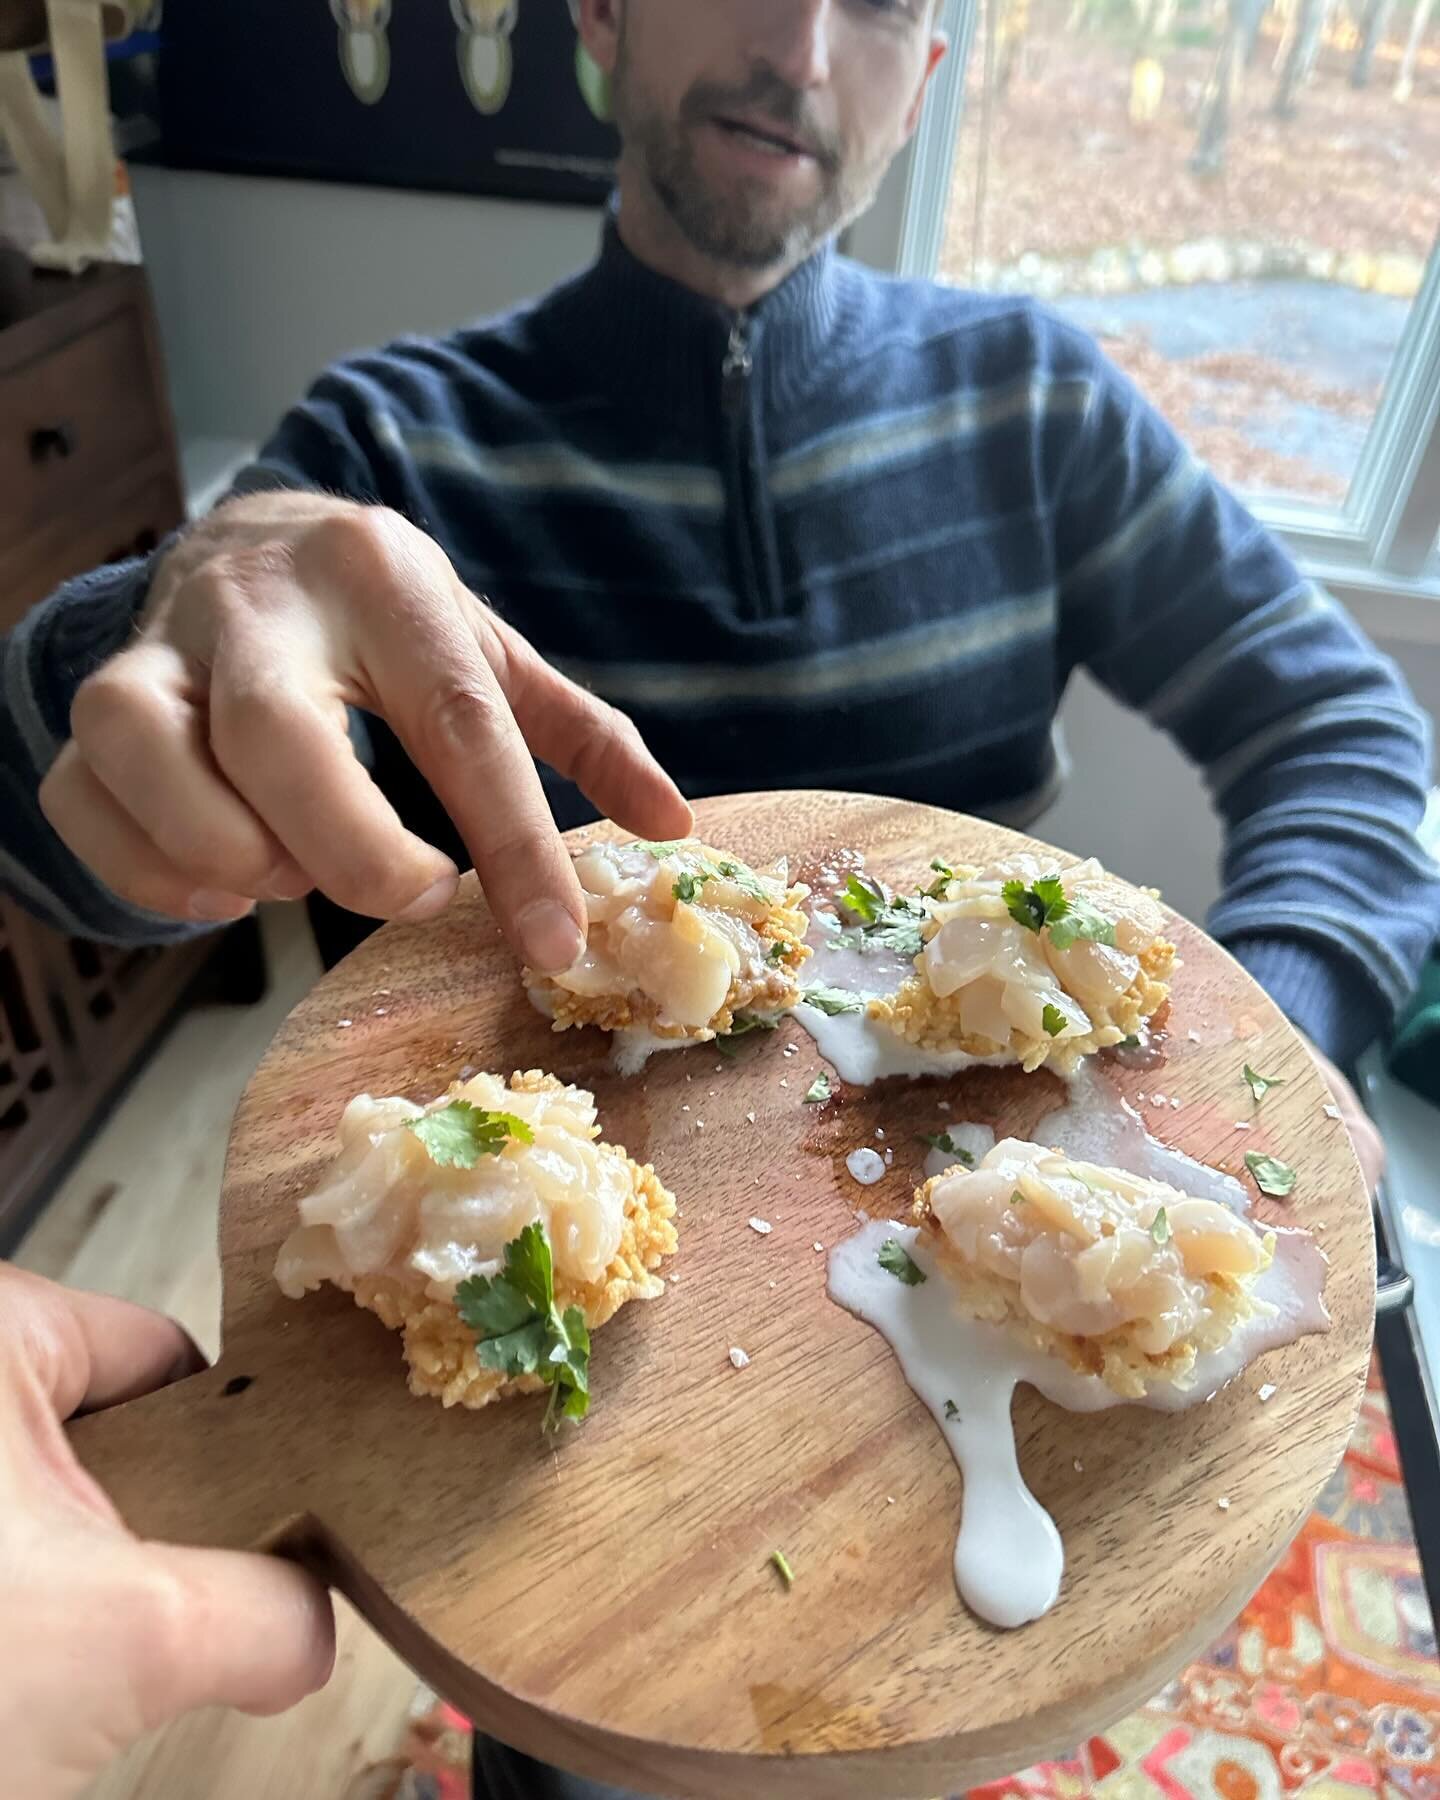 I&rsquo;m still renegotiating my relationship to Instagram. I started a substack newsletter in the meantime. There&rsquo;s a link in my profile to join! (It&rsquo;s free!) I&rsquo;m sending everyone lots of love. 

Pic above is a crispy rice cake wit